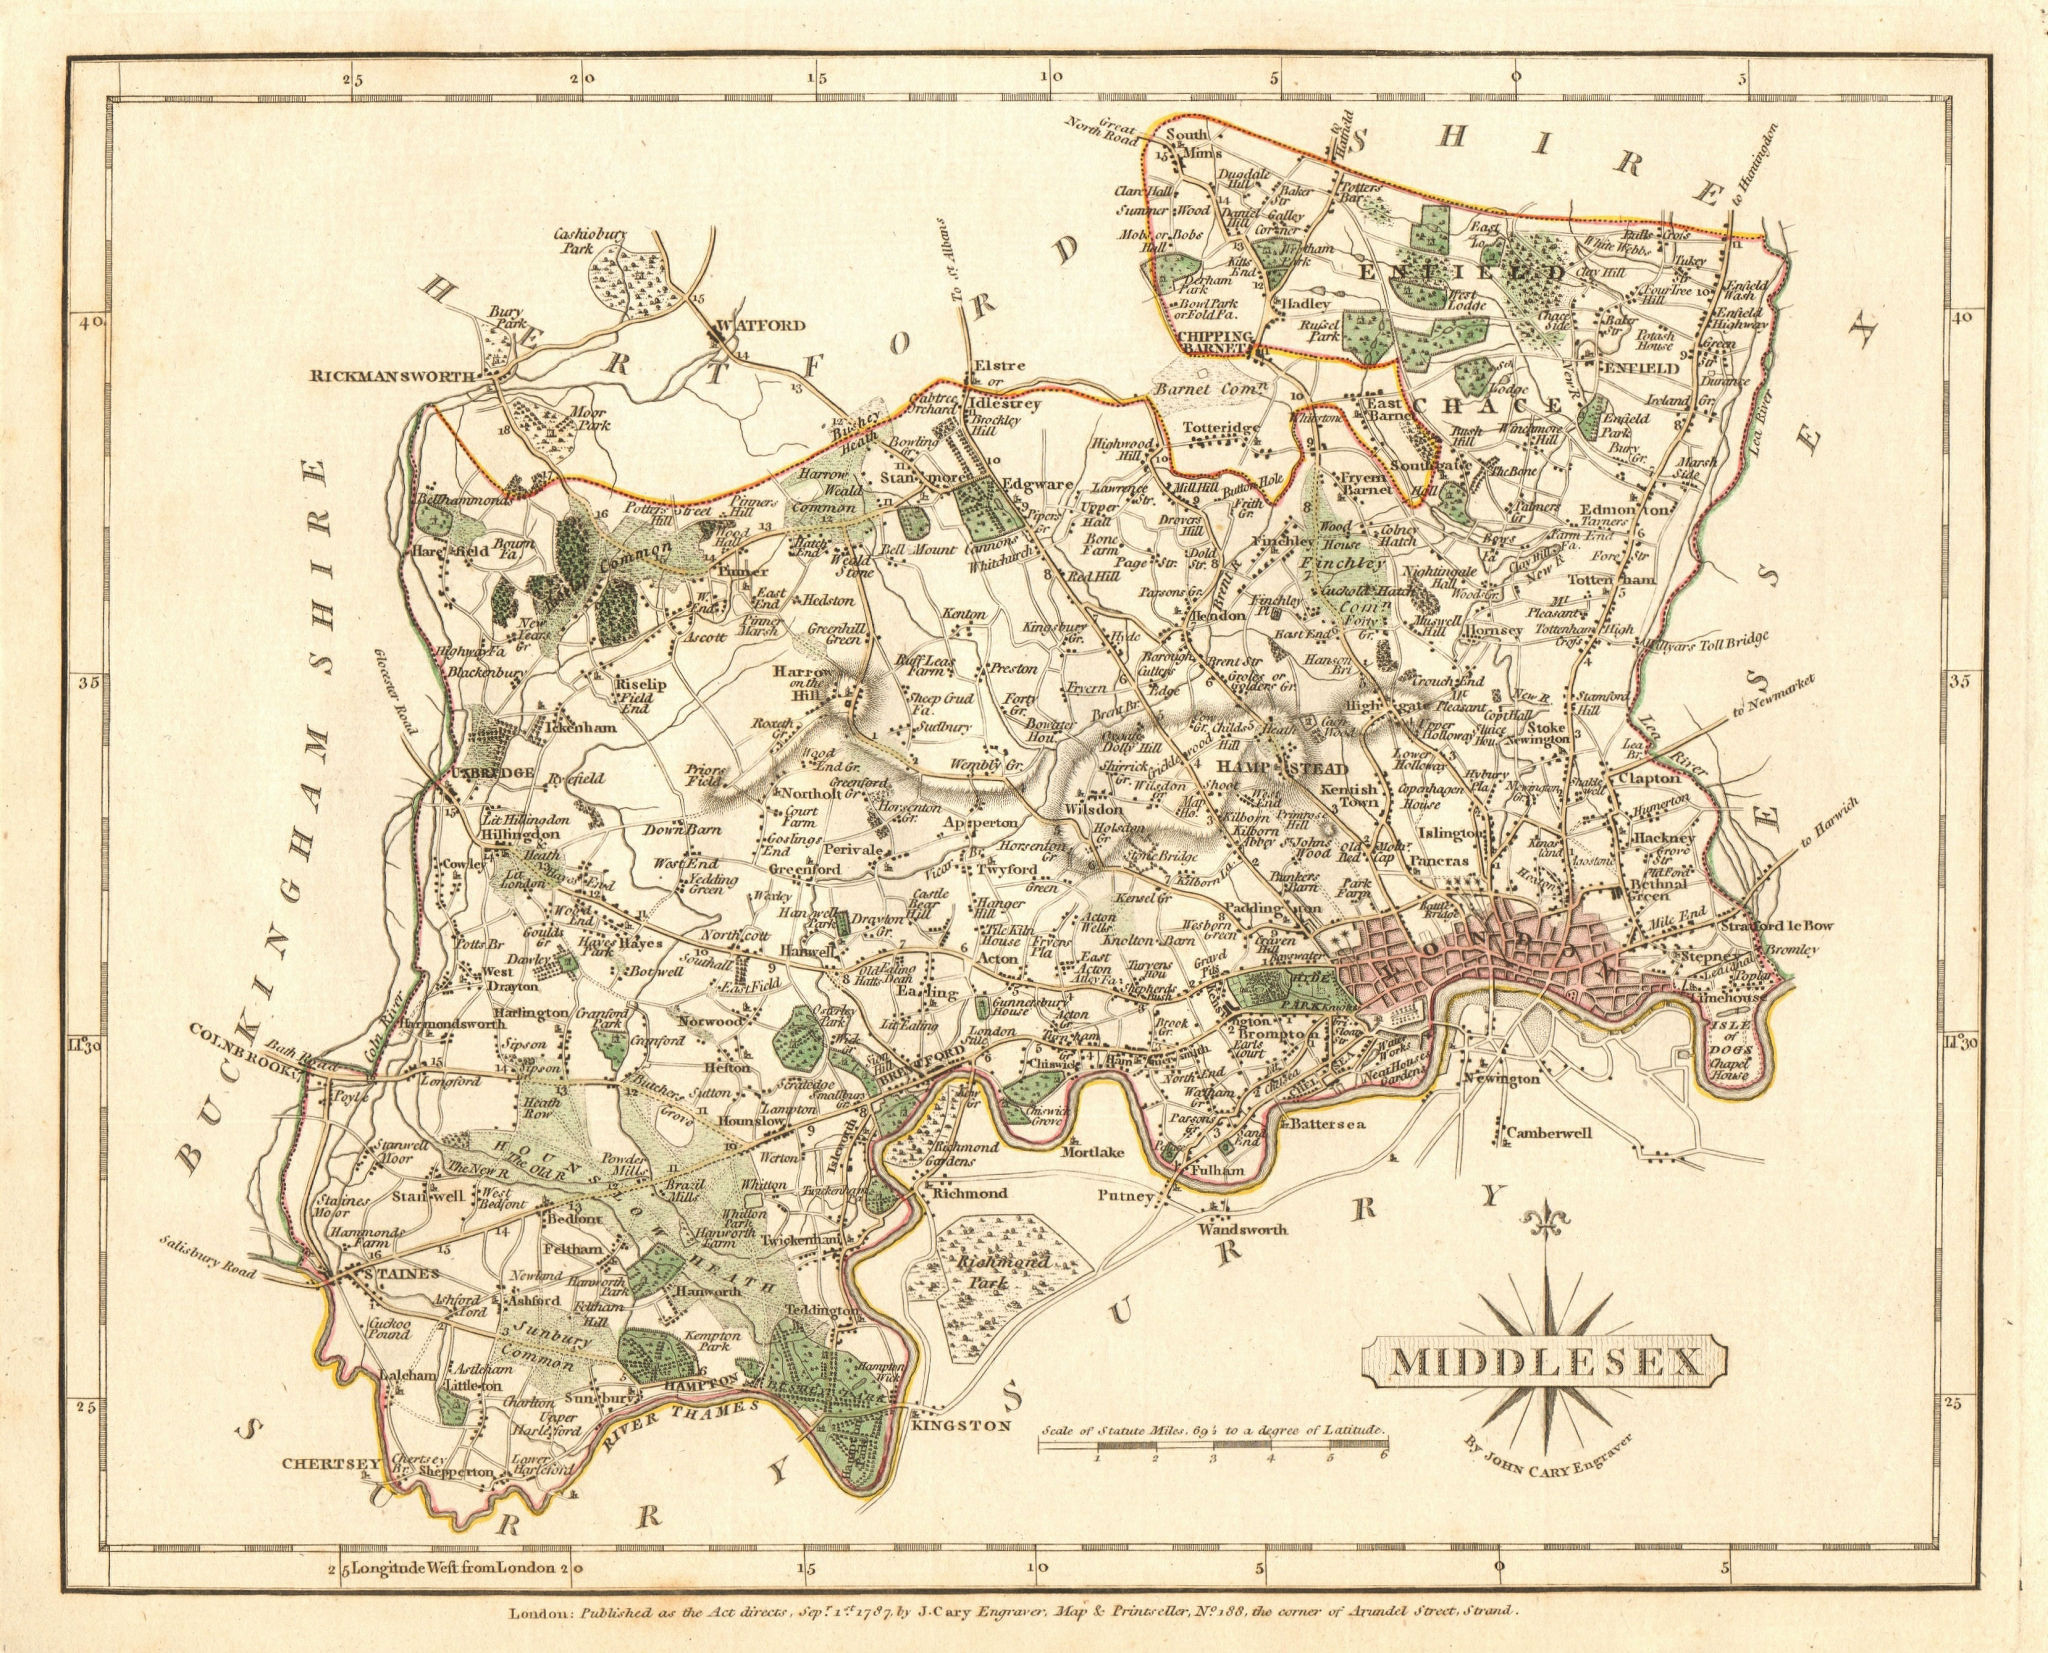 Associate Product Antique county map of MIDDLESEX by JOHN CARY. Original outline colour 1787